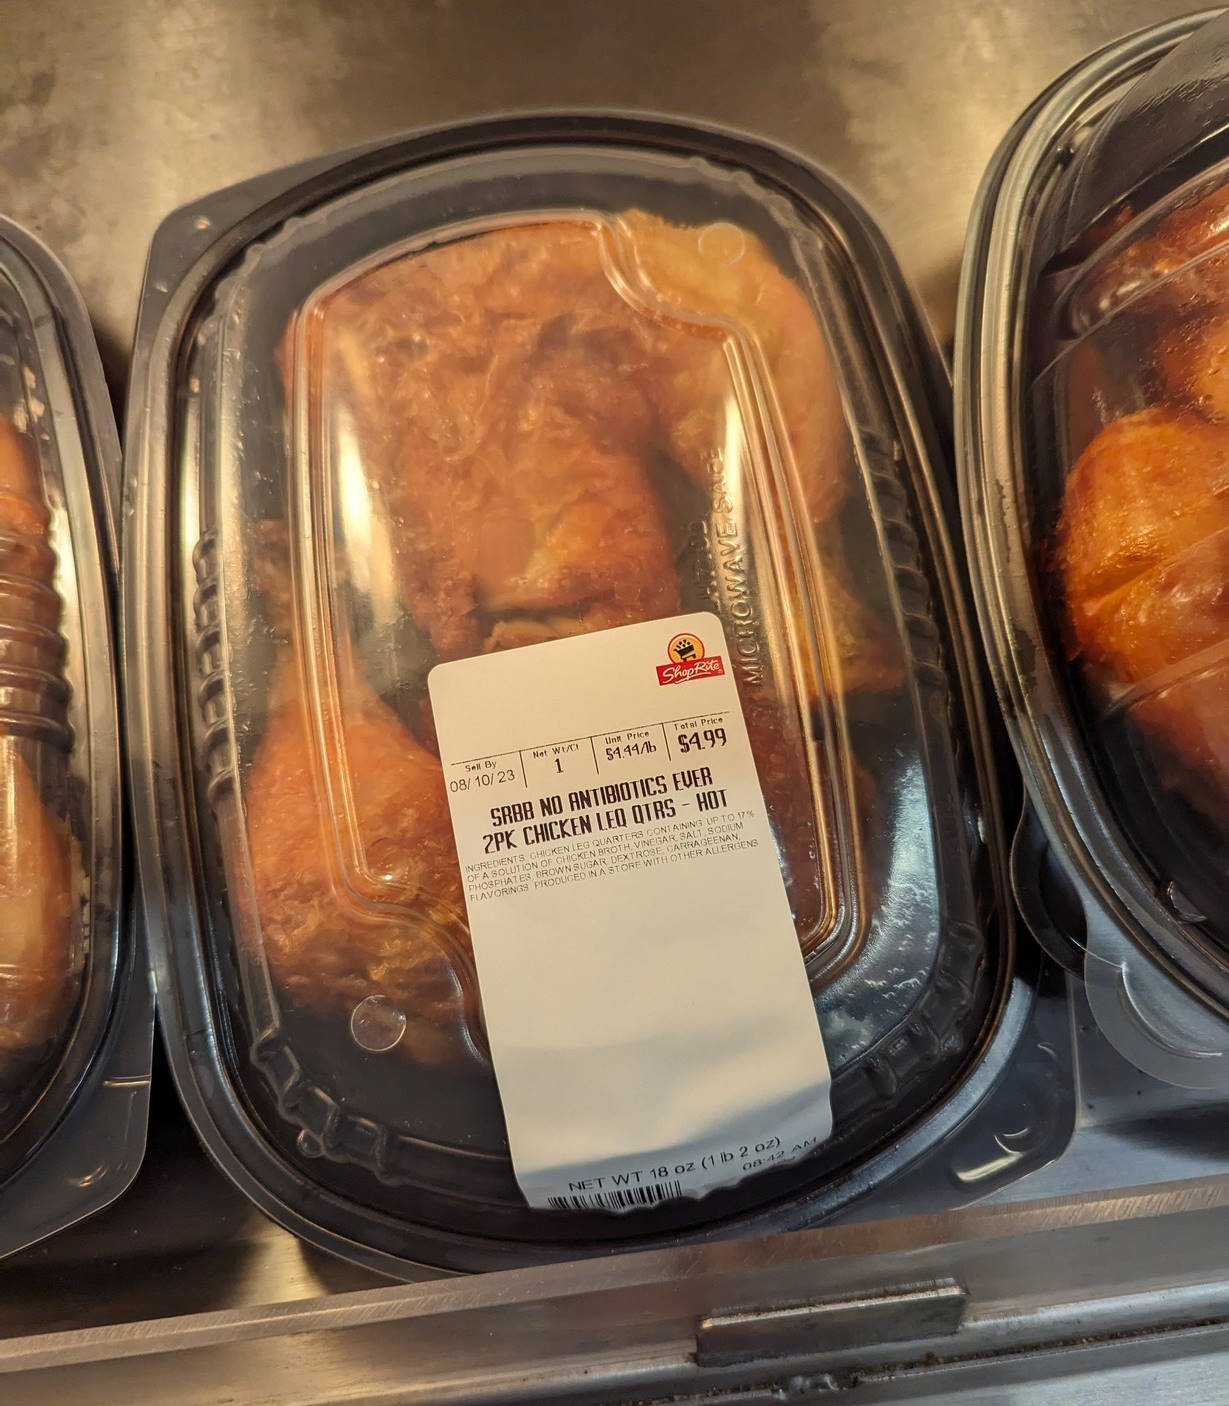 Roasted chicken quarters in plastic boxes on a heated foodservice shelf.